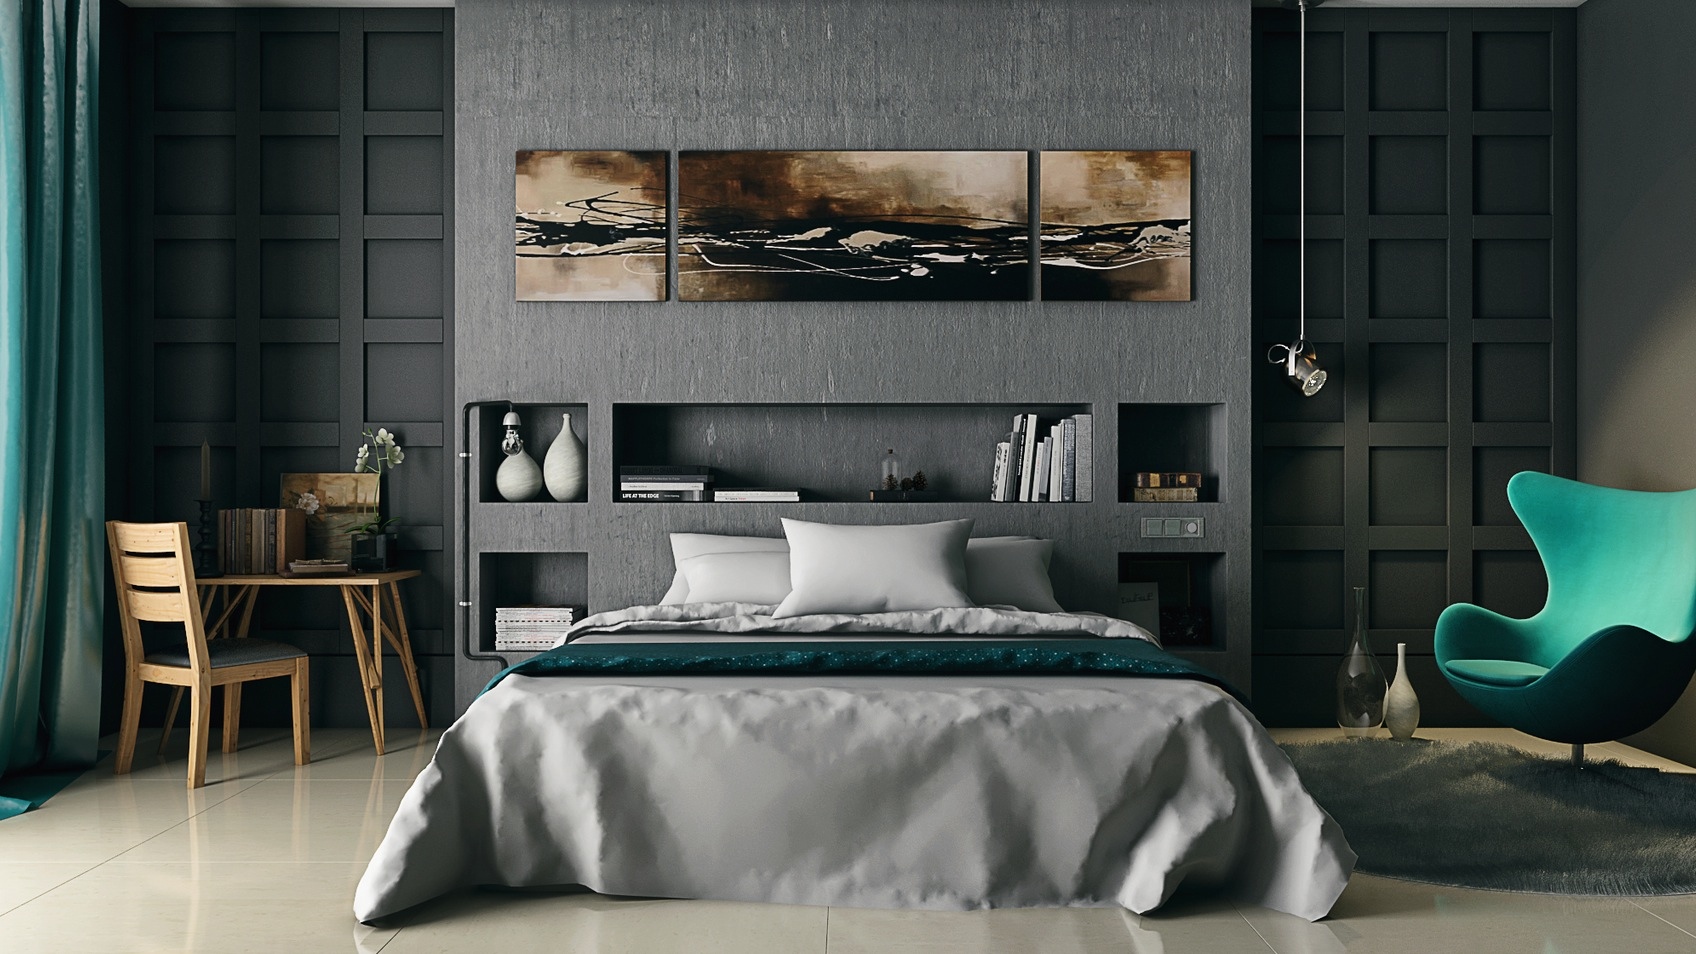 gray and wooden bedroom "width =" 1696 "height =" 954 "srcset =" https://mileray.com/wp-content/uploads/2020/05/1588509652_287_A-Variety-of-Gorgeous-Bedroom-Designs-With-Trendy-Wooden-Style.jpeg 1696w , https://mileray.com/wp-content/uploads/2016/09/gray-and-turquoise-bedroom-Imagine3D-1-300x169.jpeg 300w, https://mileray.com/wp-content/uploads/ 2016/09 / gray-turquoise-colored-bedroom-Imagine3D-1-768x432.jpeg 768w, https://mileray.com/wp-content/uploads/2016/09/gray-and-turquoise-bedroom-Imagine3D-1 -1024x576 .jpeg 1024w, https://mileray.com/wp-content/uploads/2016/09/gray-and-turquoise-bedroom-Imagine3D-1-696x392.jpeg 696w, https://mileray.com/wp -content / uploads / 2016/09 / gray-turquoise-colored-bedroom-Imagine3D- 1-1068x601.jpeg 1068w, https://mileray.com/wp-content/uploads/2016/09/gray-and-turquoise- bedroom-Imagine3D- 1-747x420.jpeg 747w "sizes =" (maximum width: 1696px) 100vw, 1696px